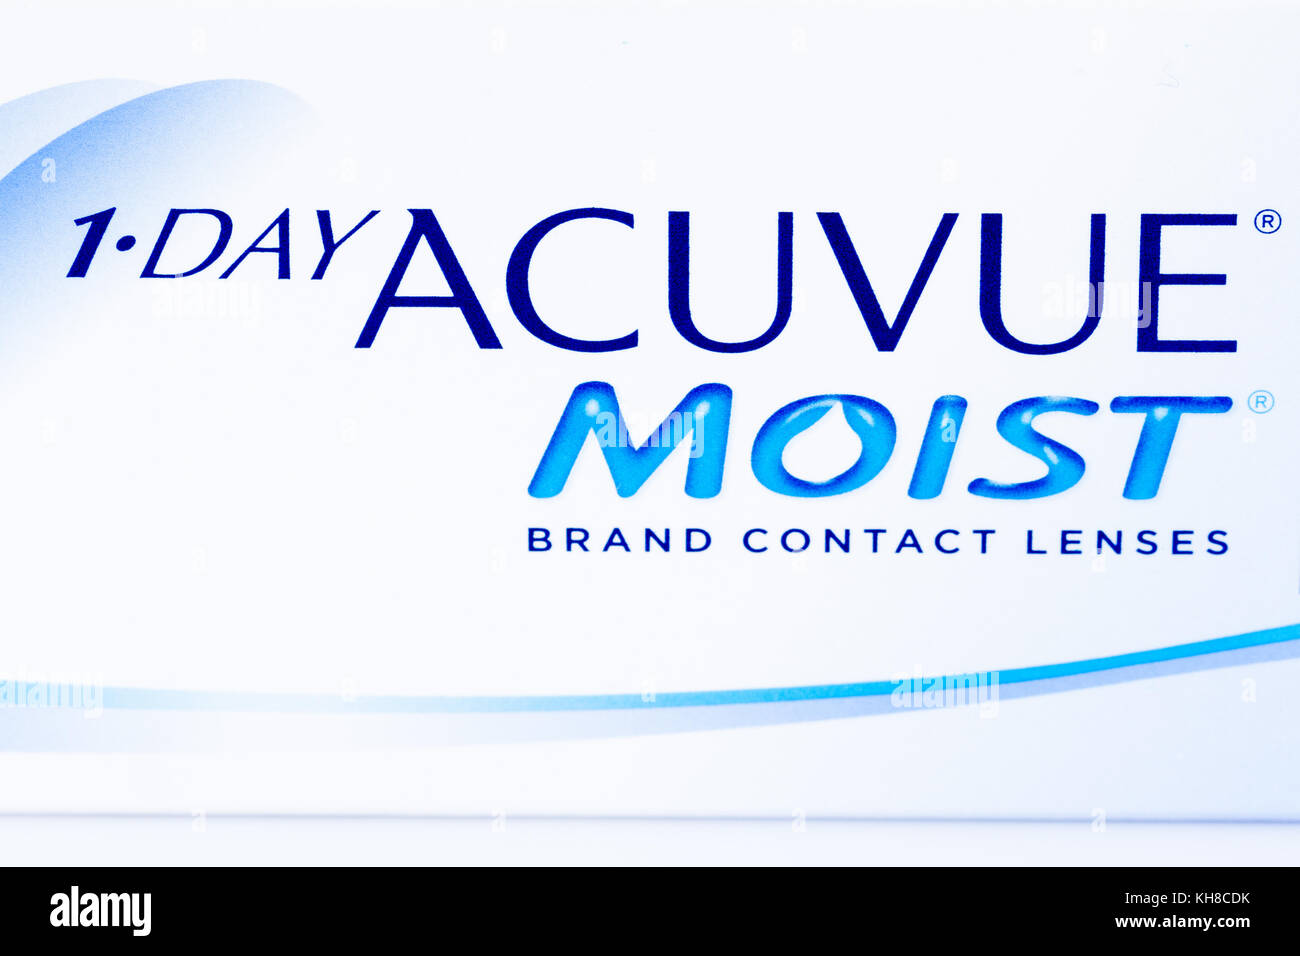 1-day acuvue moist brand contact lenses, close up of logo on box, United Kingdom Stock Photo